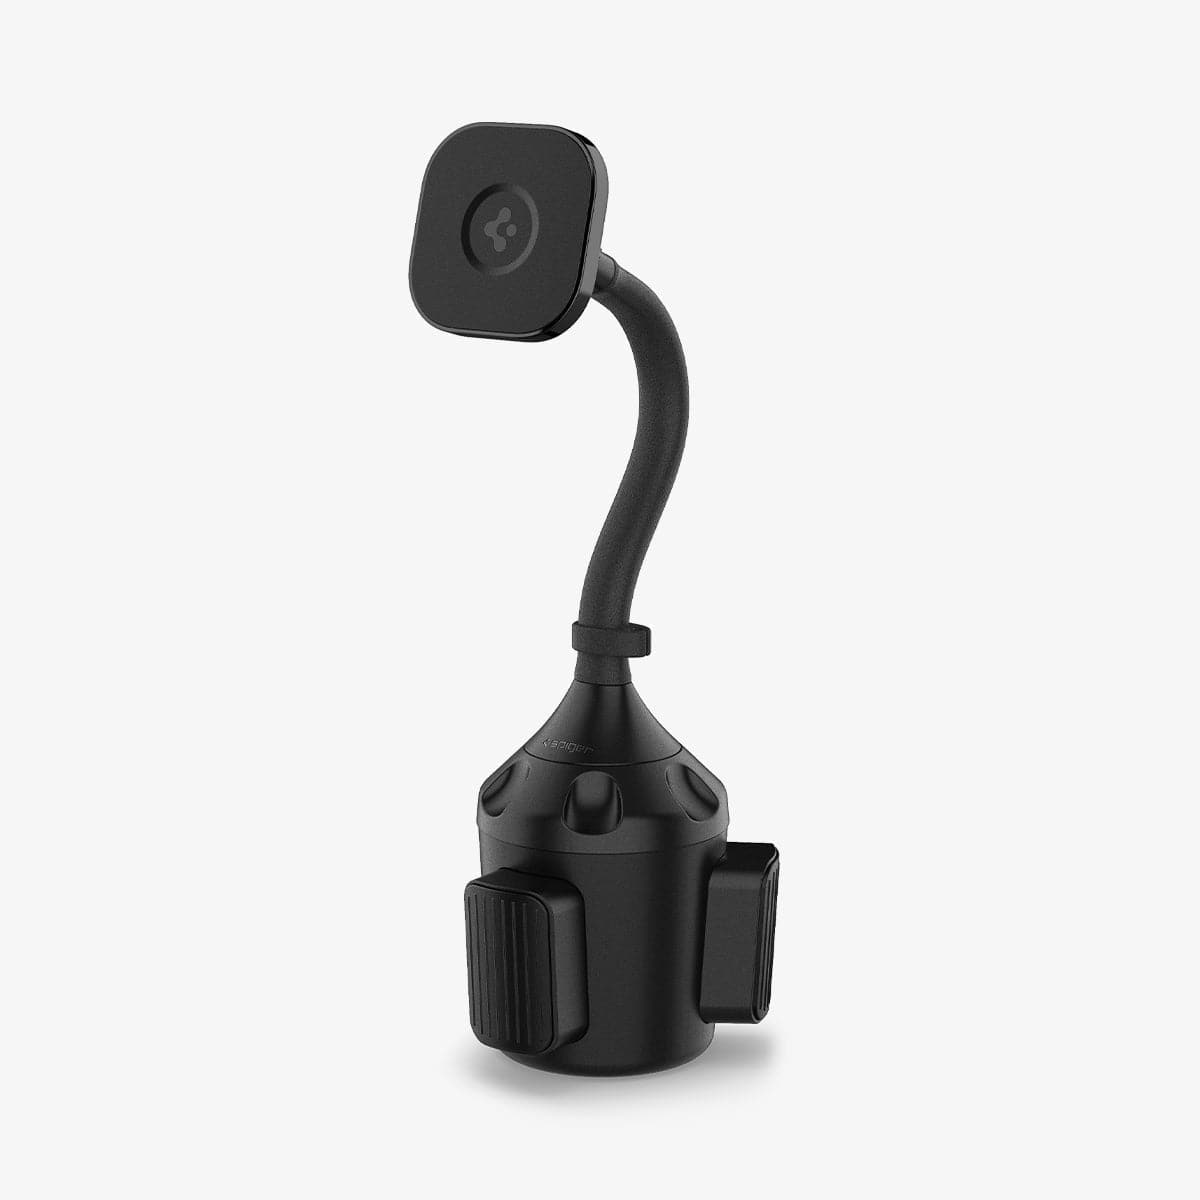 ACP03809 - OneTap Car Mount Cup Holder (MagFit) in black showing the front and side